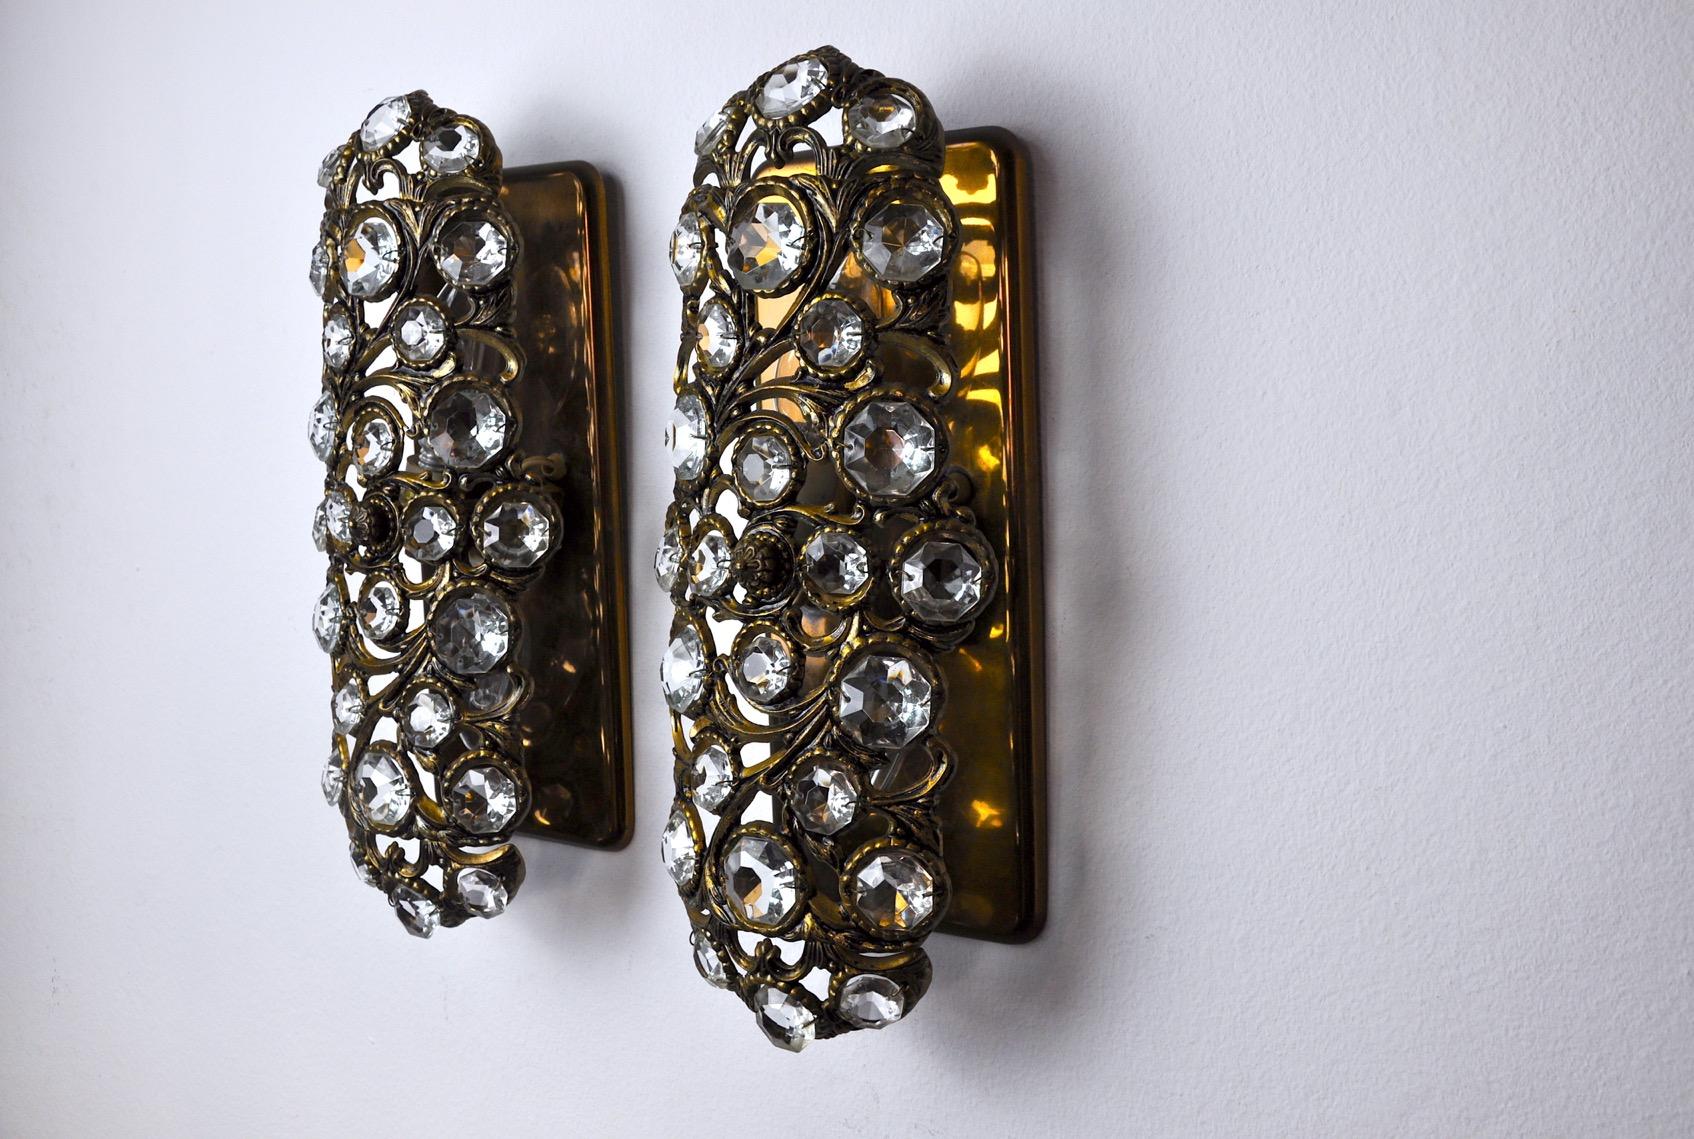 Rare pair of palwa sconces designated by ernest palm and produced in the 1960s in barcelona. Brass structure composed of cut crystals in perfect condition. Rare design object that will illuminate your interior wonderfully. Electricity checked, marks